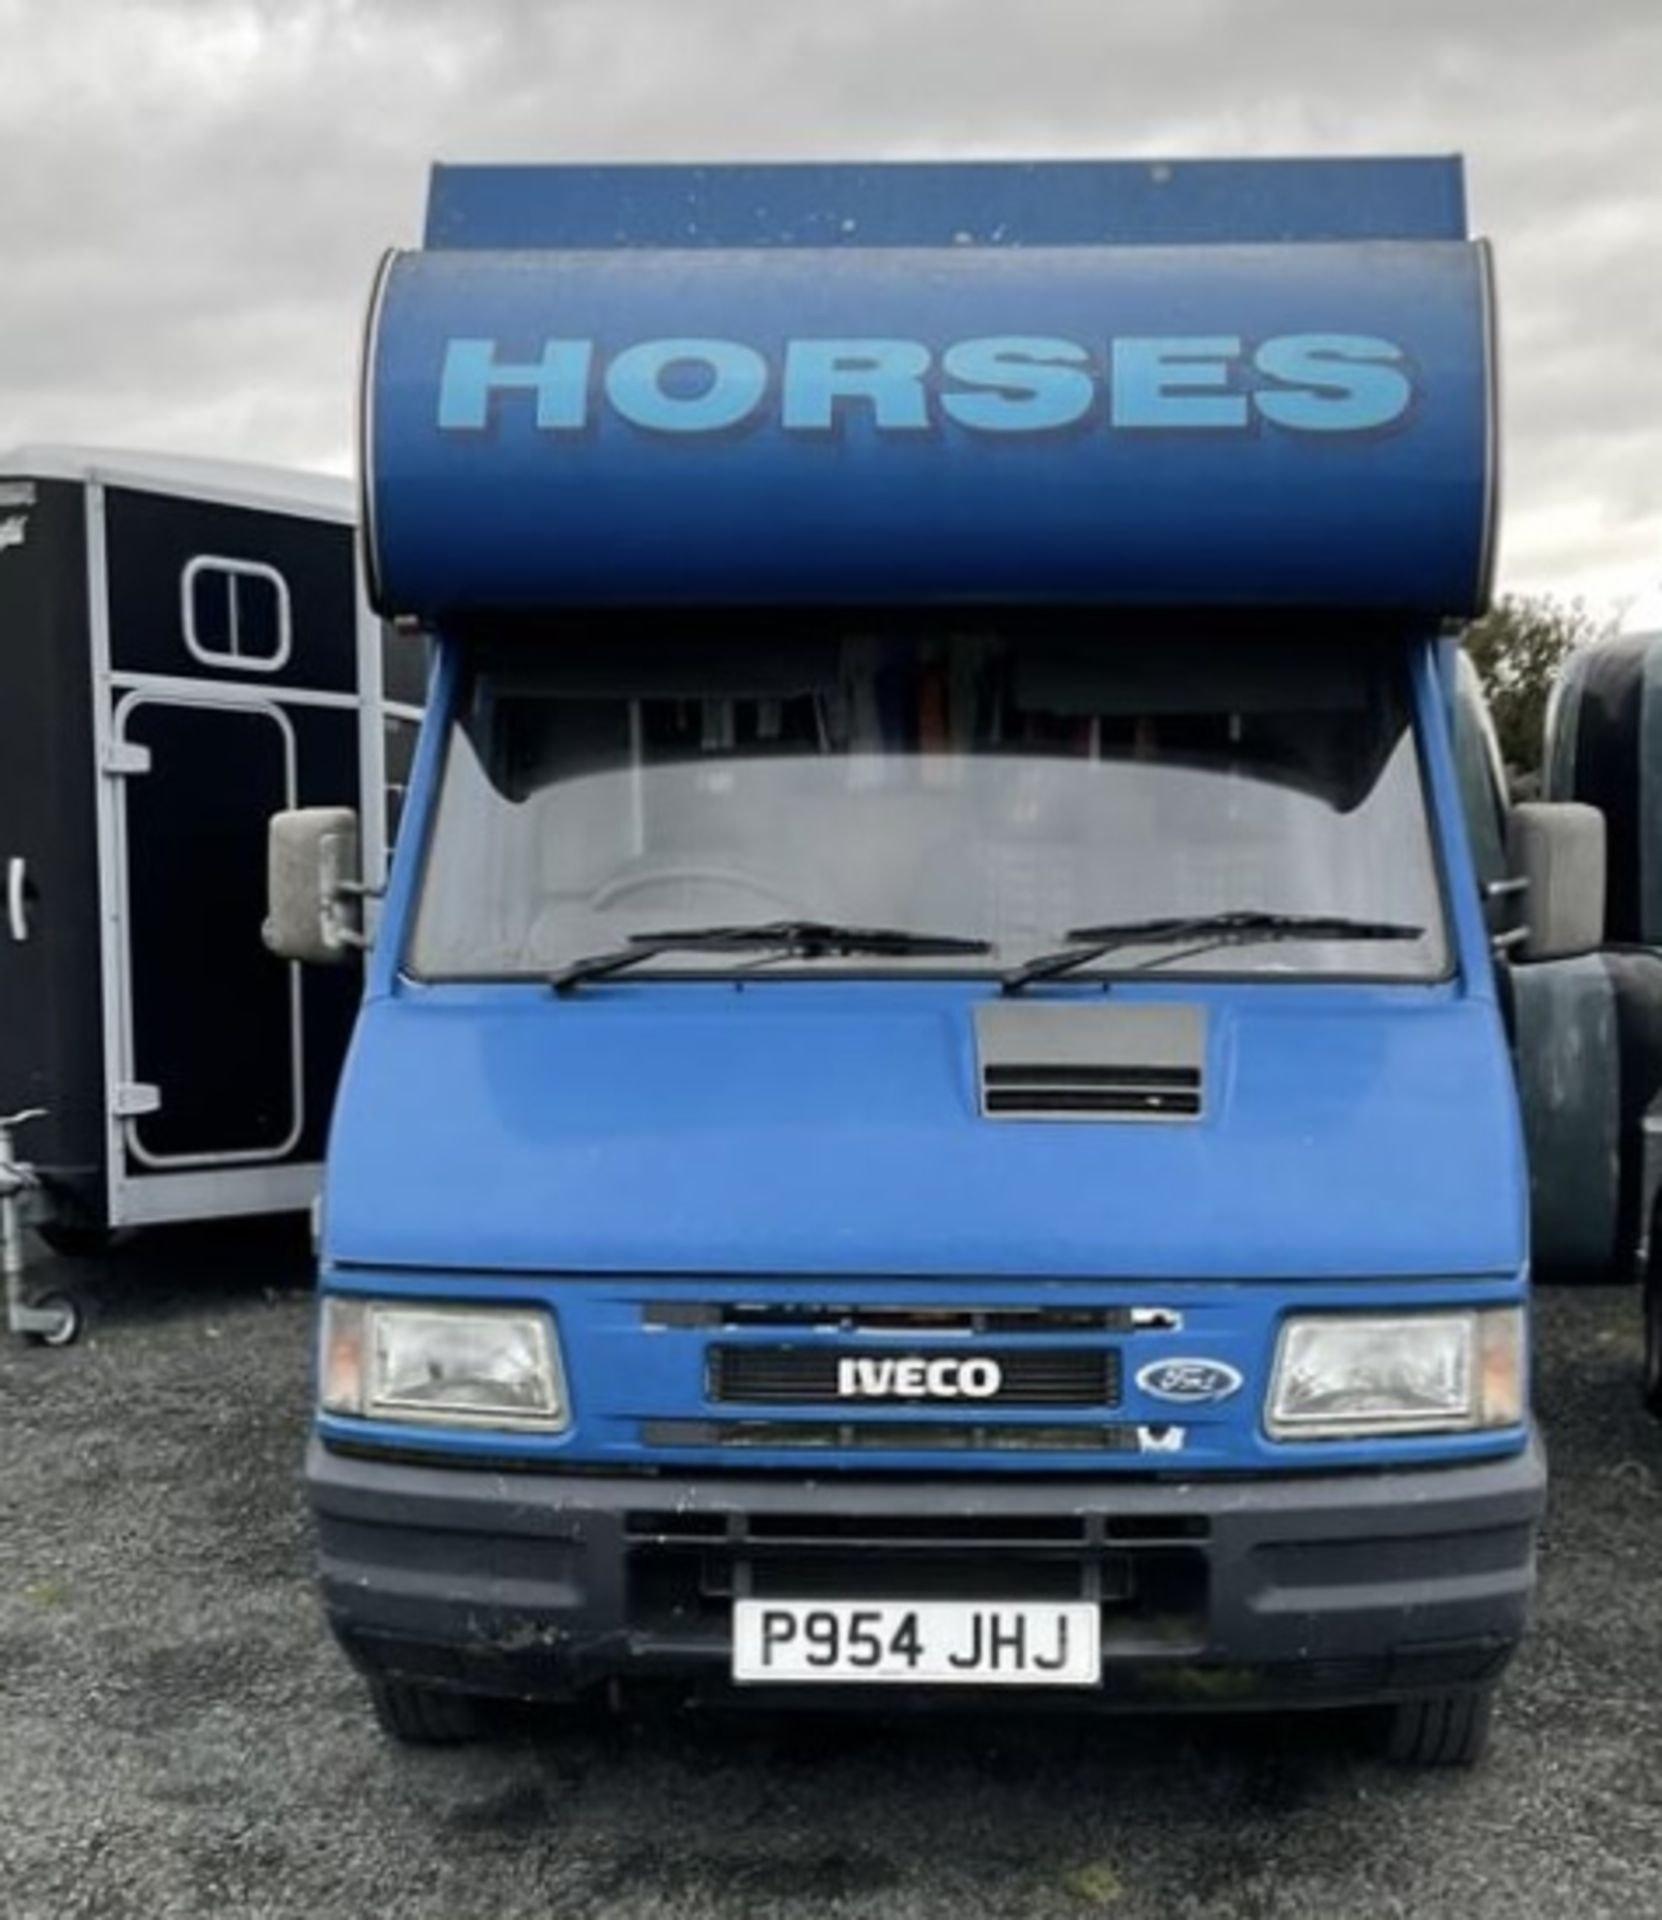 HORSEBOX TWO STALL IVECO .GROOMS AREA AND SIDE RAMP.STARTS RUNS AND DRIVES .LOCATED IN NORTHERN - Image 4 of 9